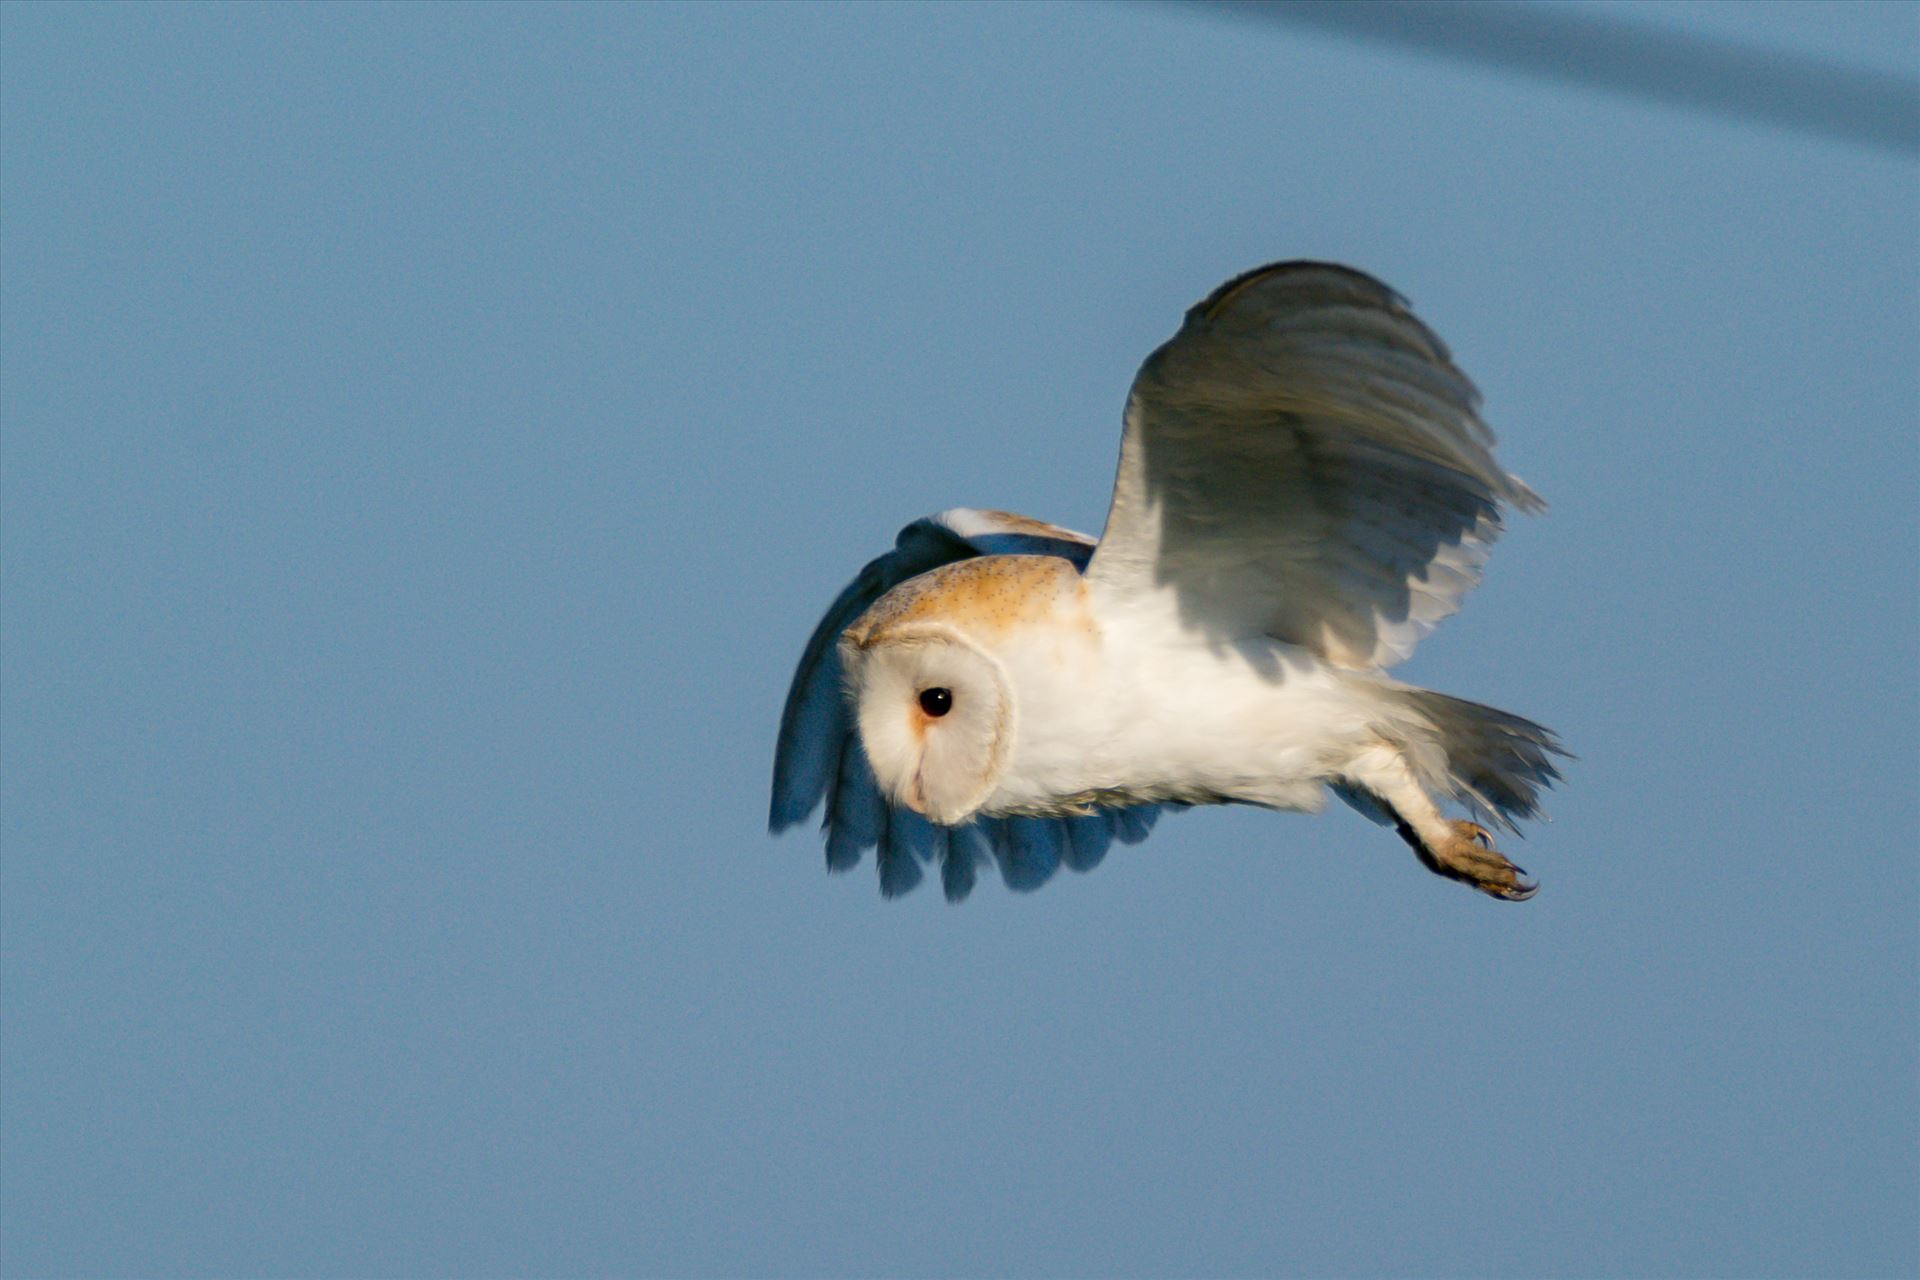 Barn Owl on the hunt 03 - A Barn Owl on the hunt for its breakfast by AJ Stoves Photography